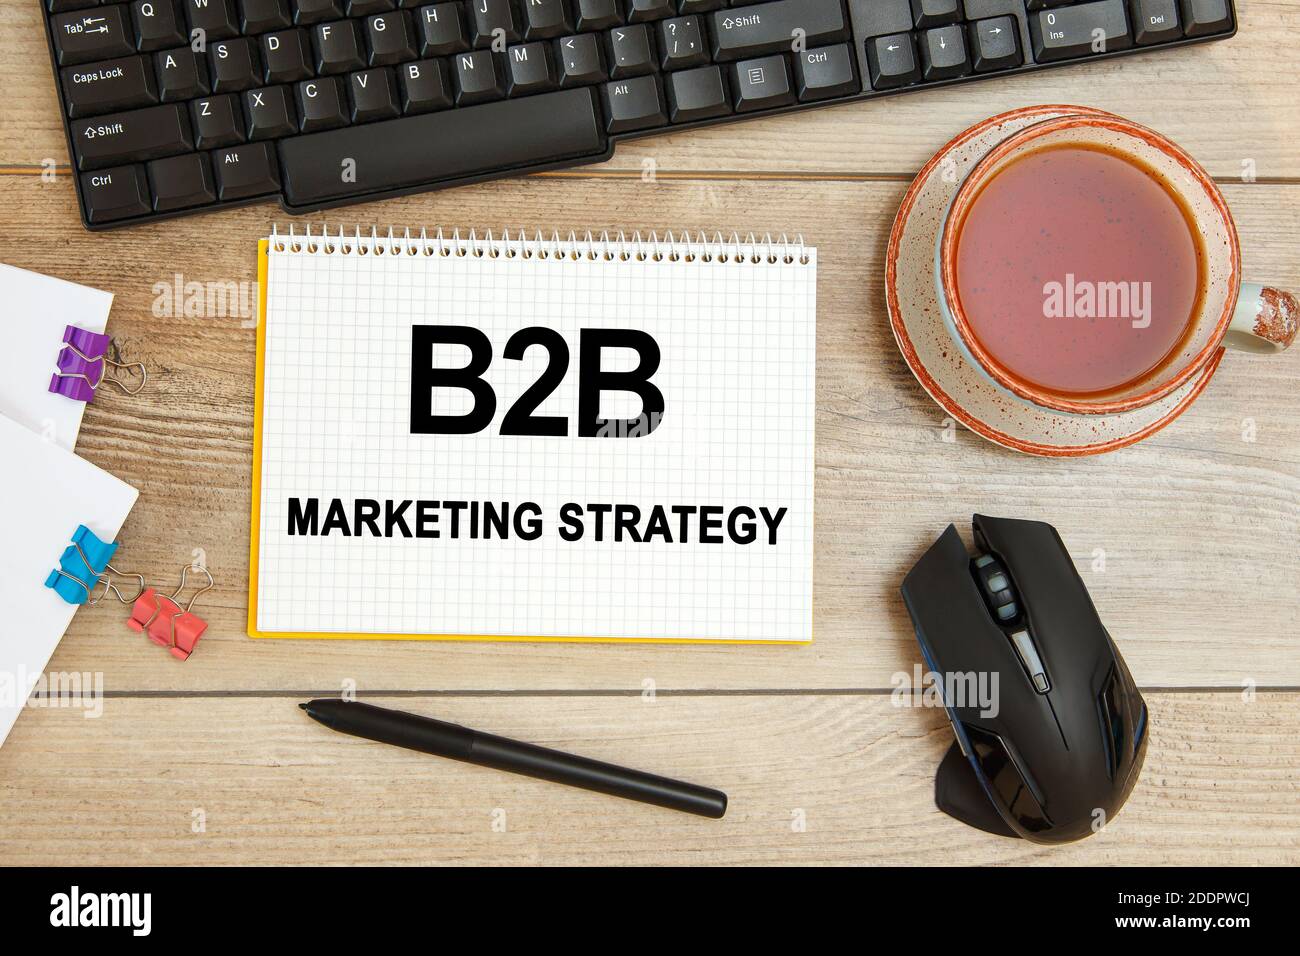 Office desk and notebook with text - B2B marketing strategy, keyboard and a cup of tea Stock Photo